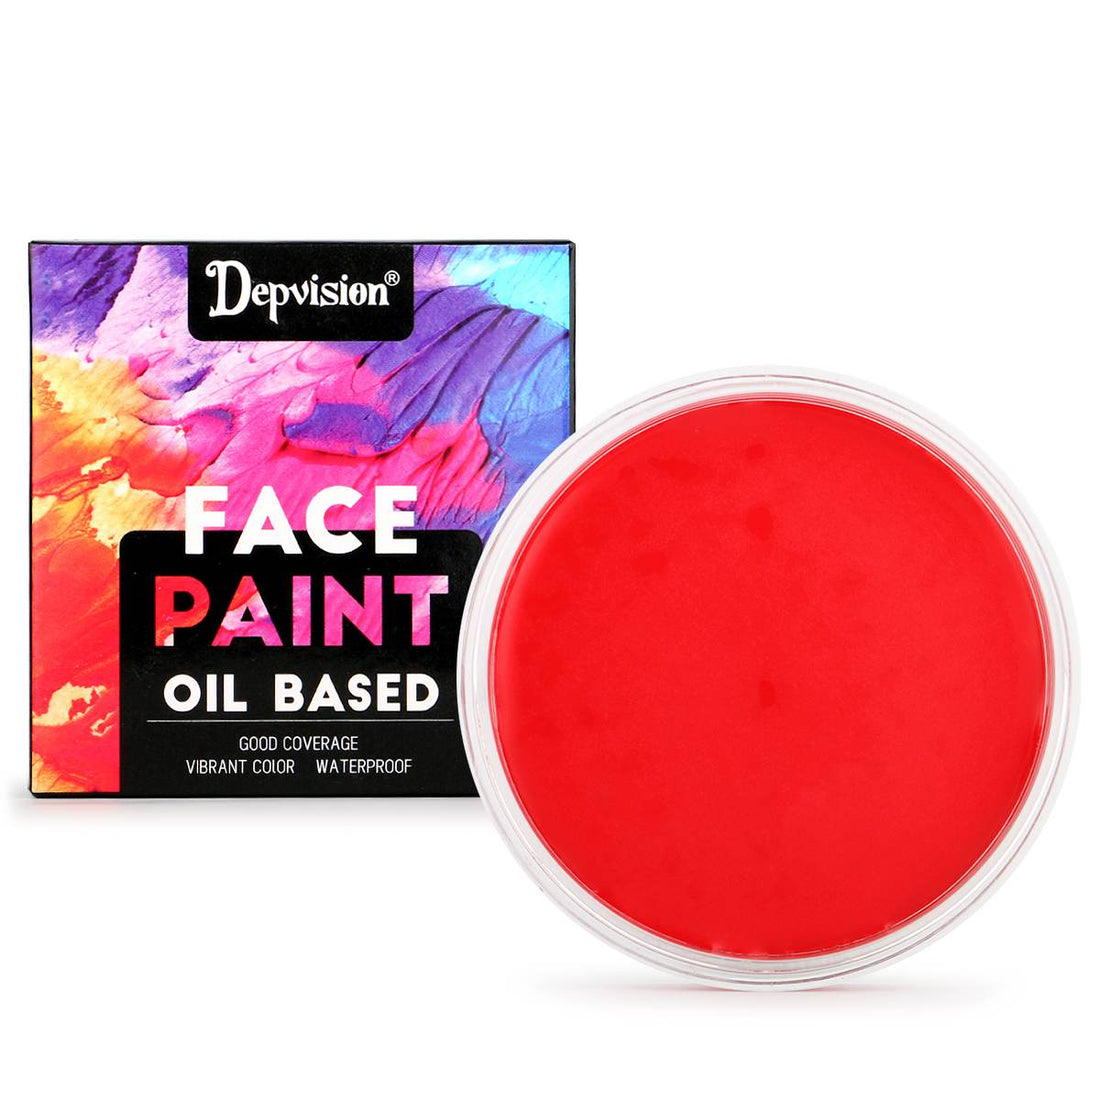 Waterproof Oil Based Face Paint - Red